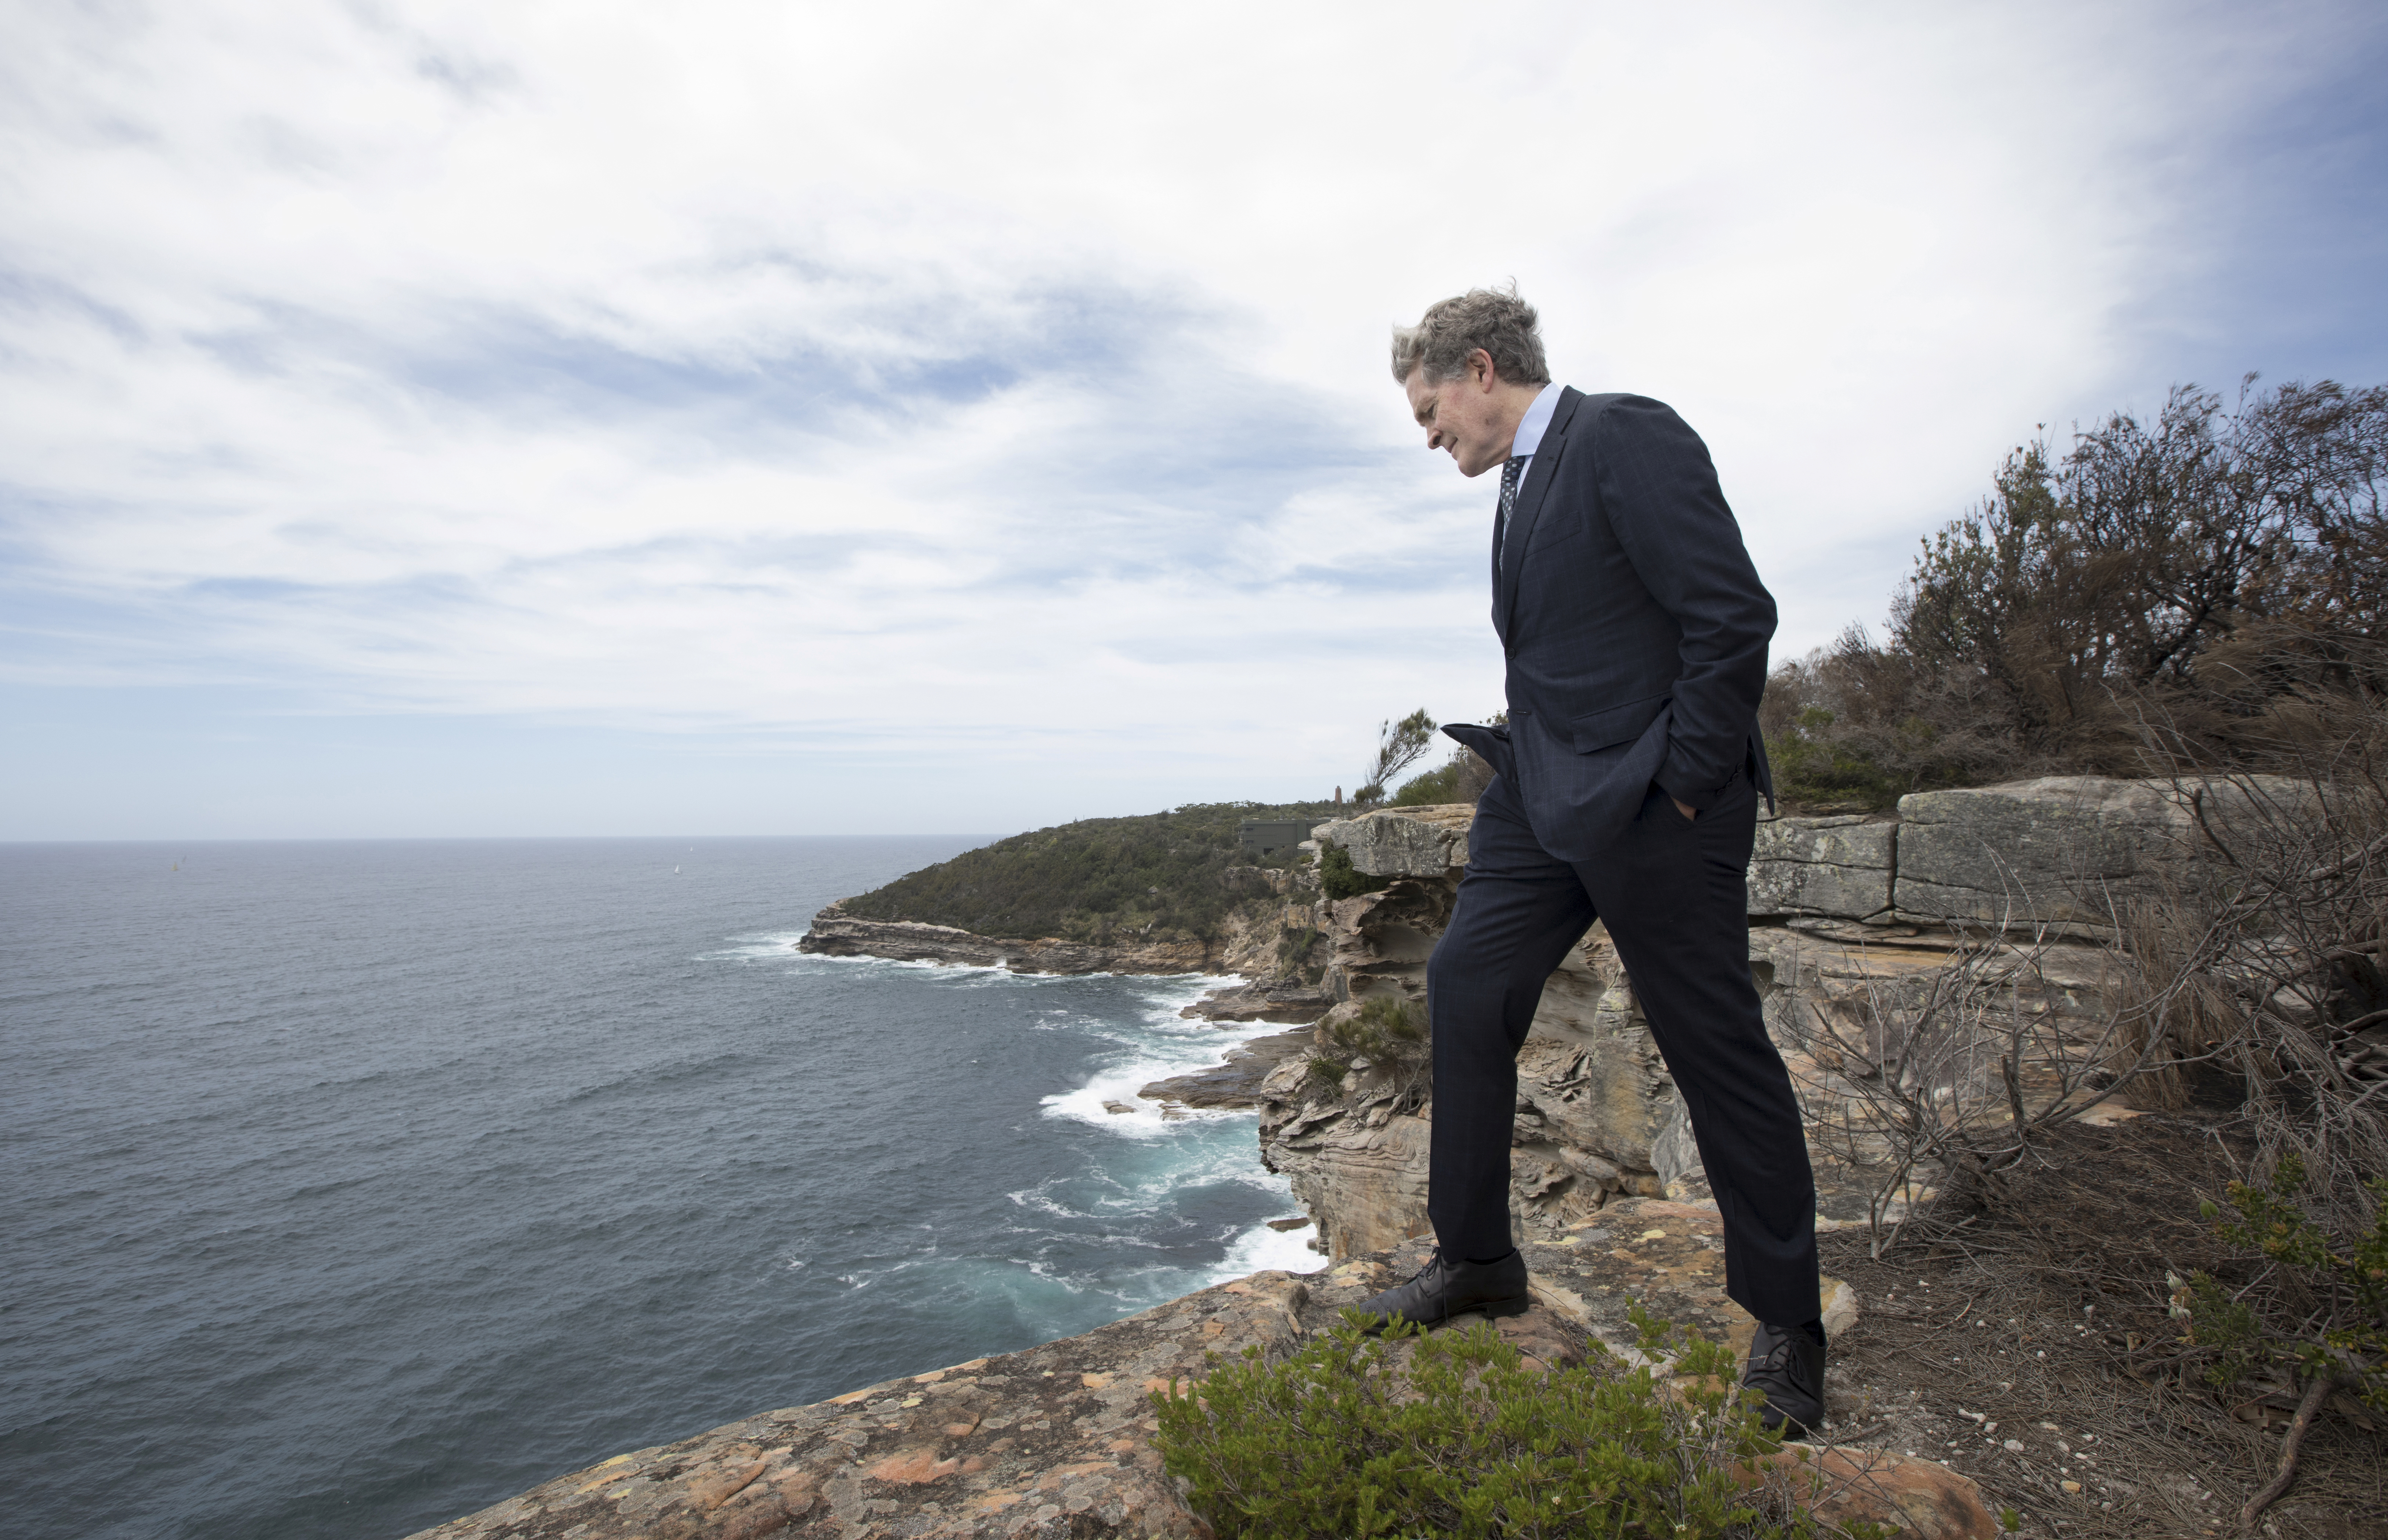 Steve Johnson, the brother of murdered Scott Johnson, looks down to the rocks and ocean below at the point along the cliff at Blue Fish Point, North Head, Manly where his brother fell to his death 30 years ago.